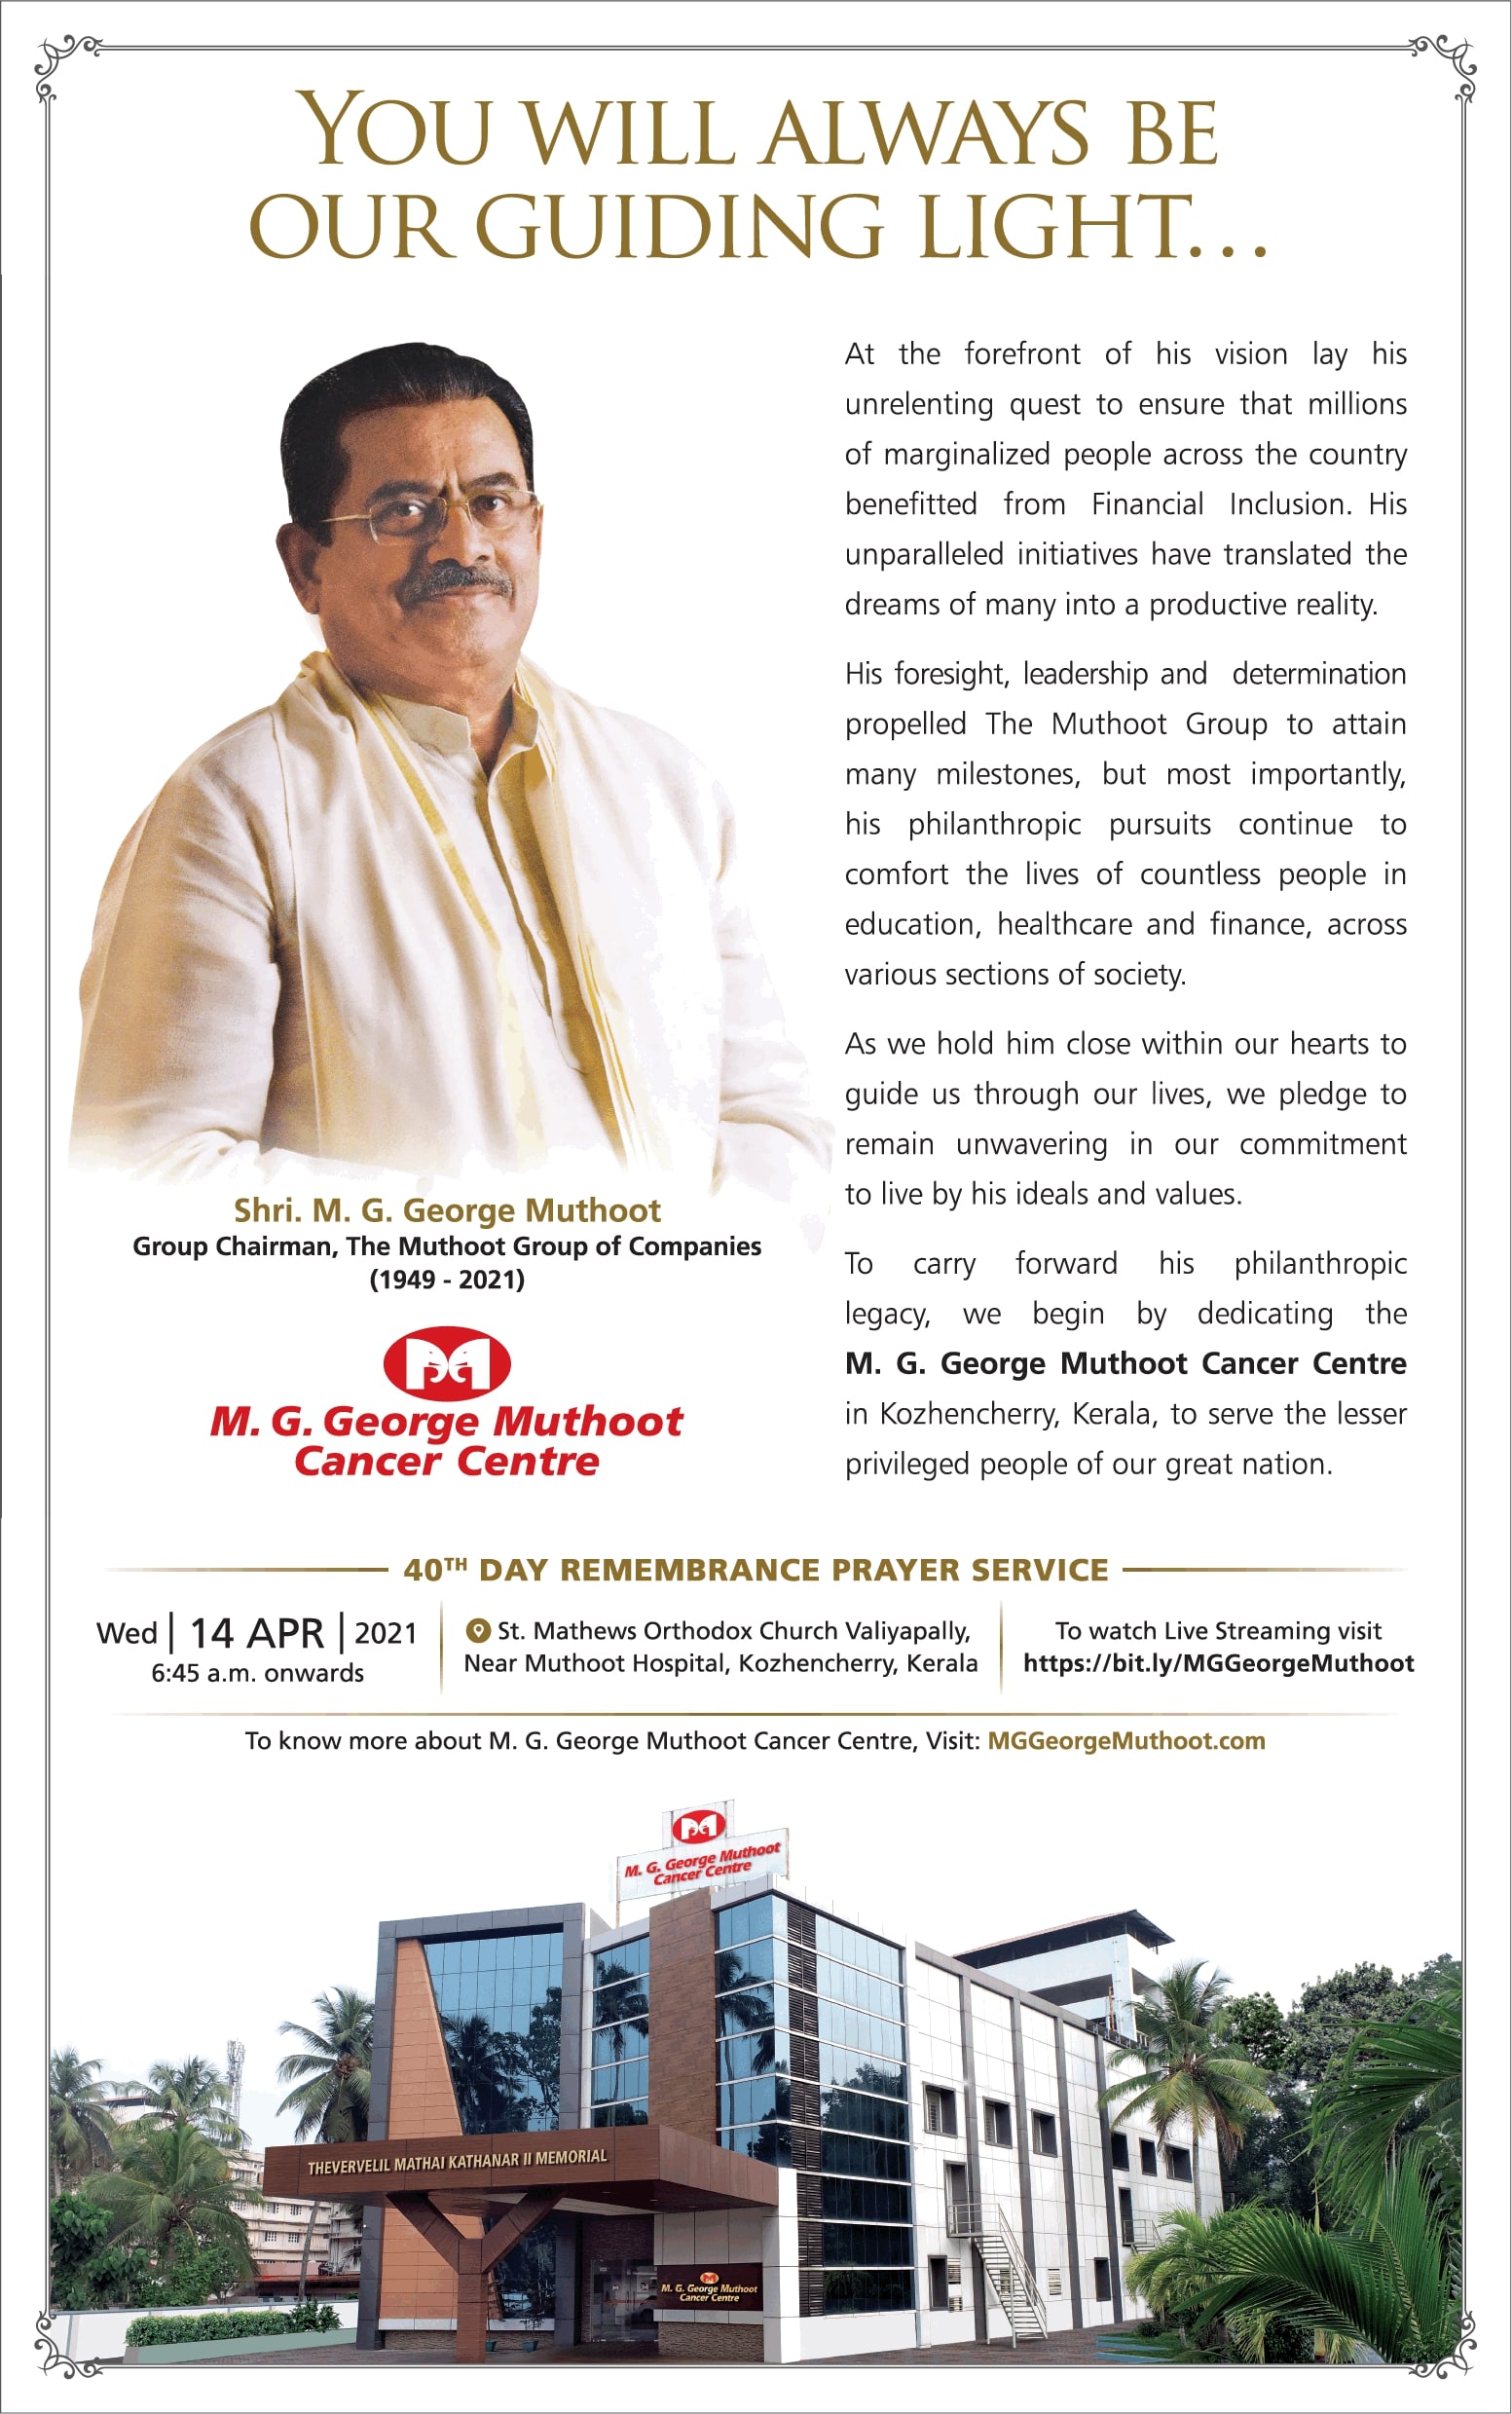 40th-day-remembrance-prayer-service-shri-m-g-george-muthoot-chairman-the-muthoot-group-of-companies-ad-times-of-india-mumbai-14-04-2021